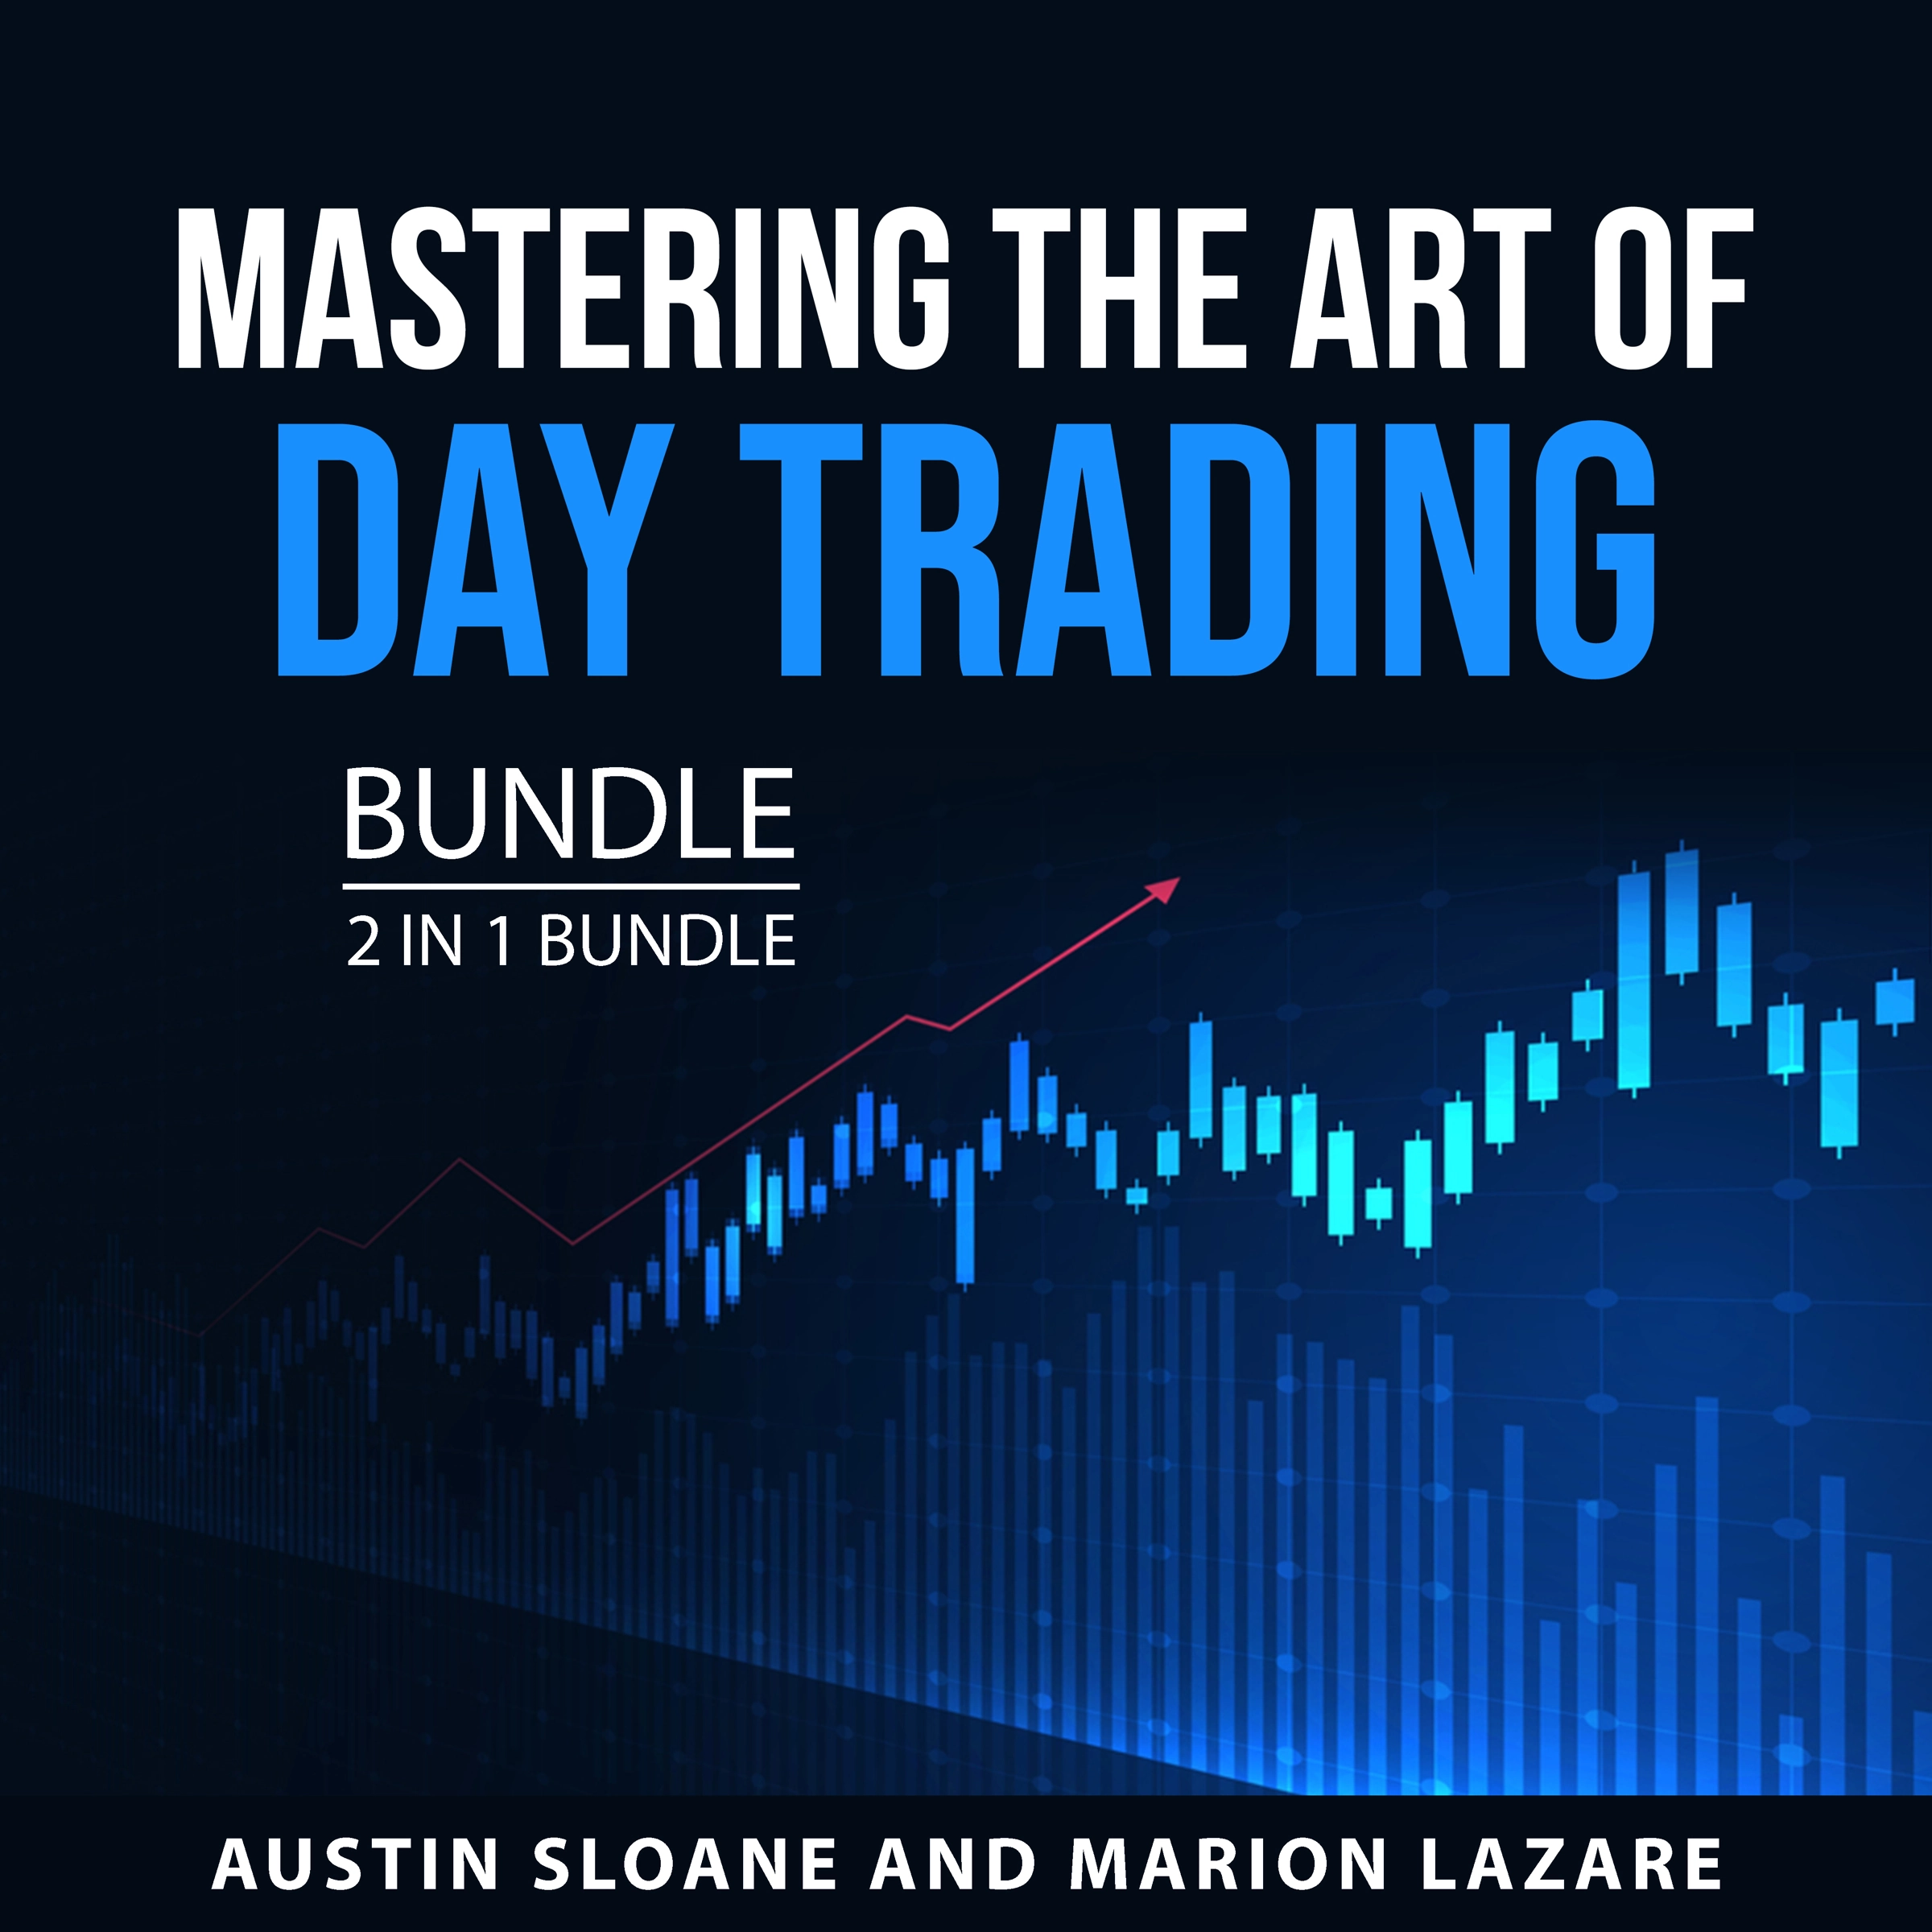 Mastering the Art of Day Trading Bundle, 2 in 1 Bundle by Marion Lazare Audiobook